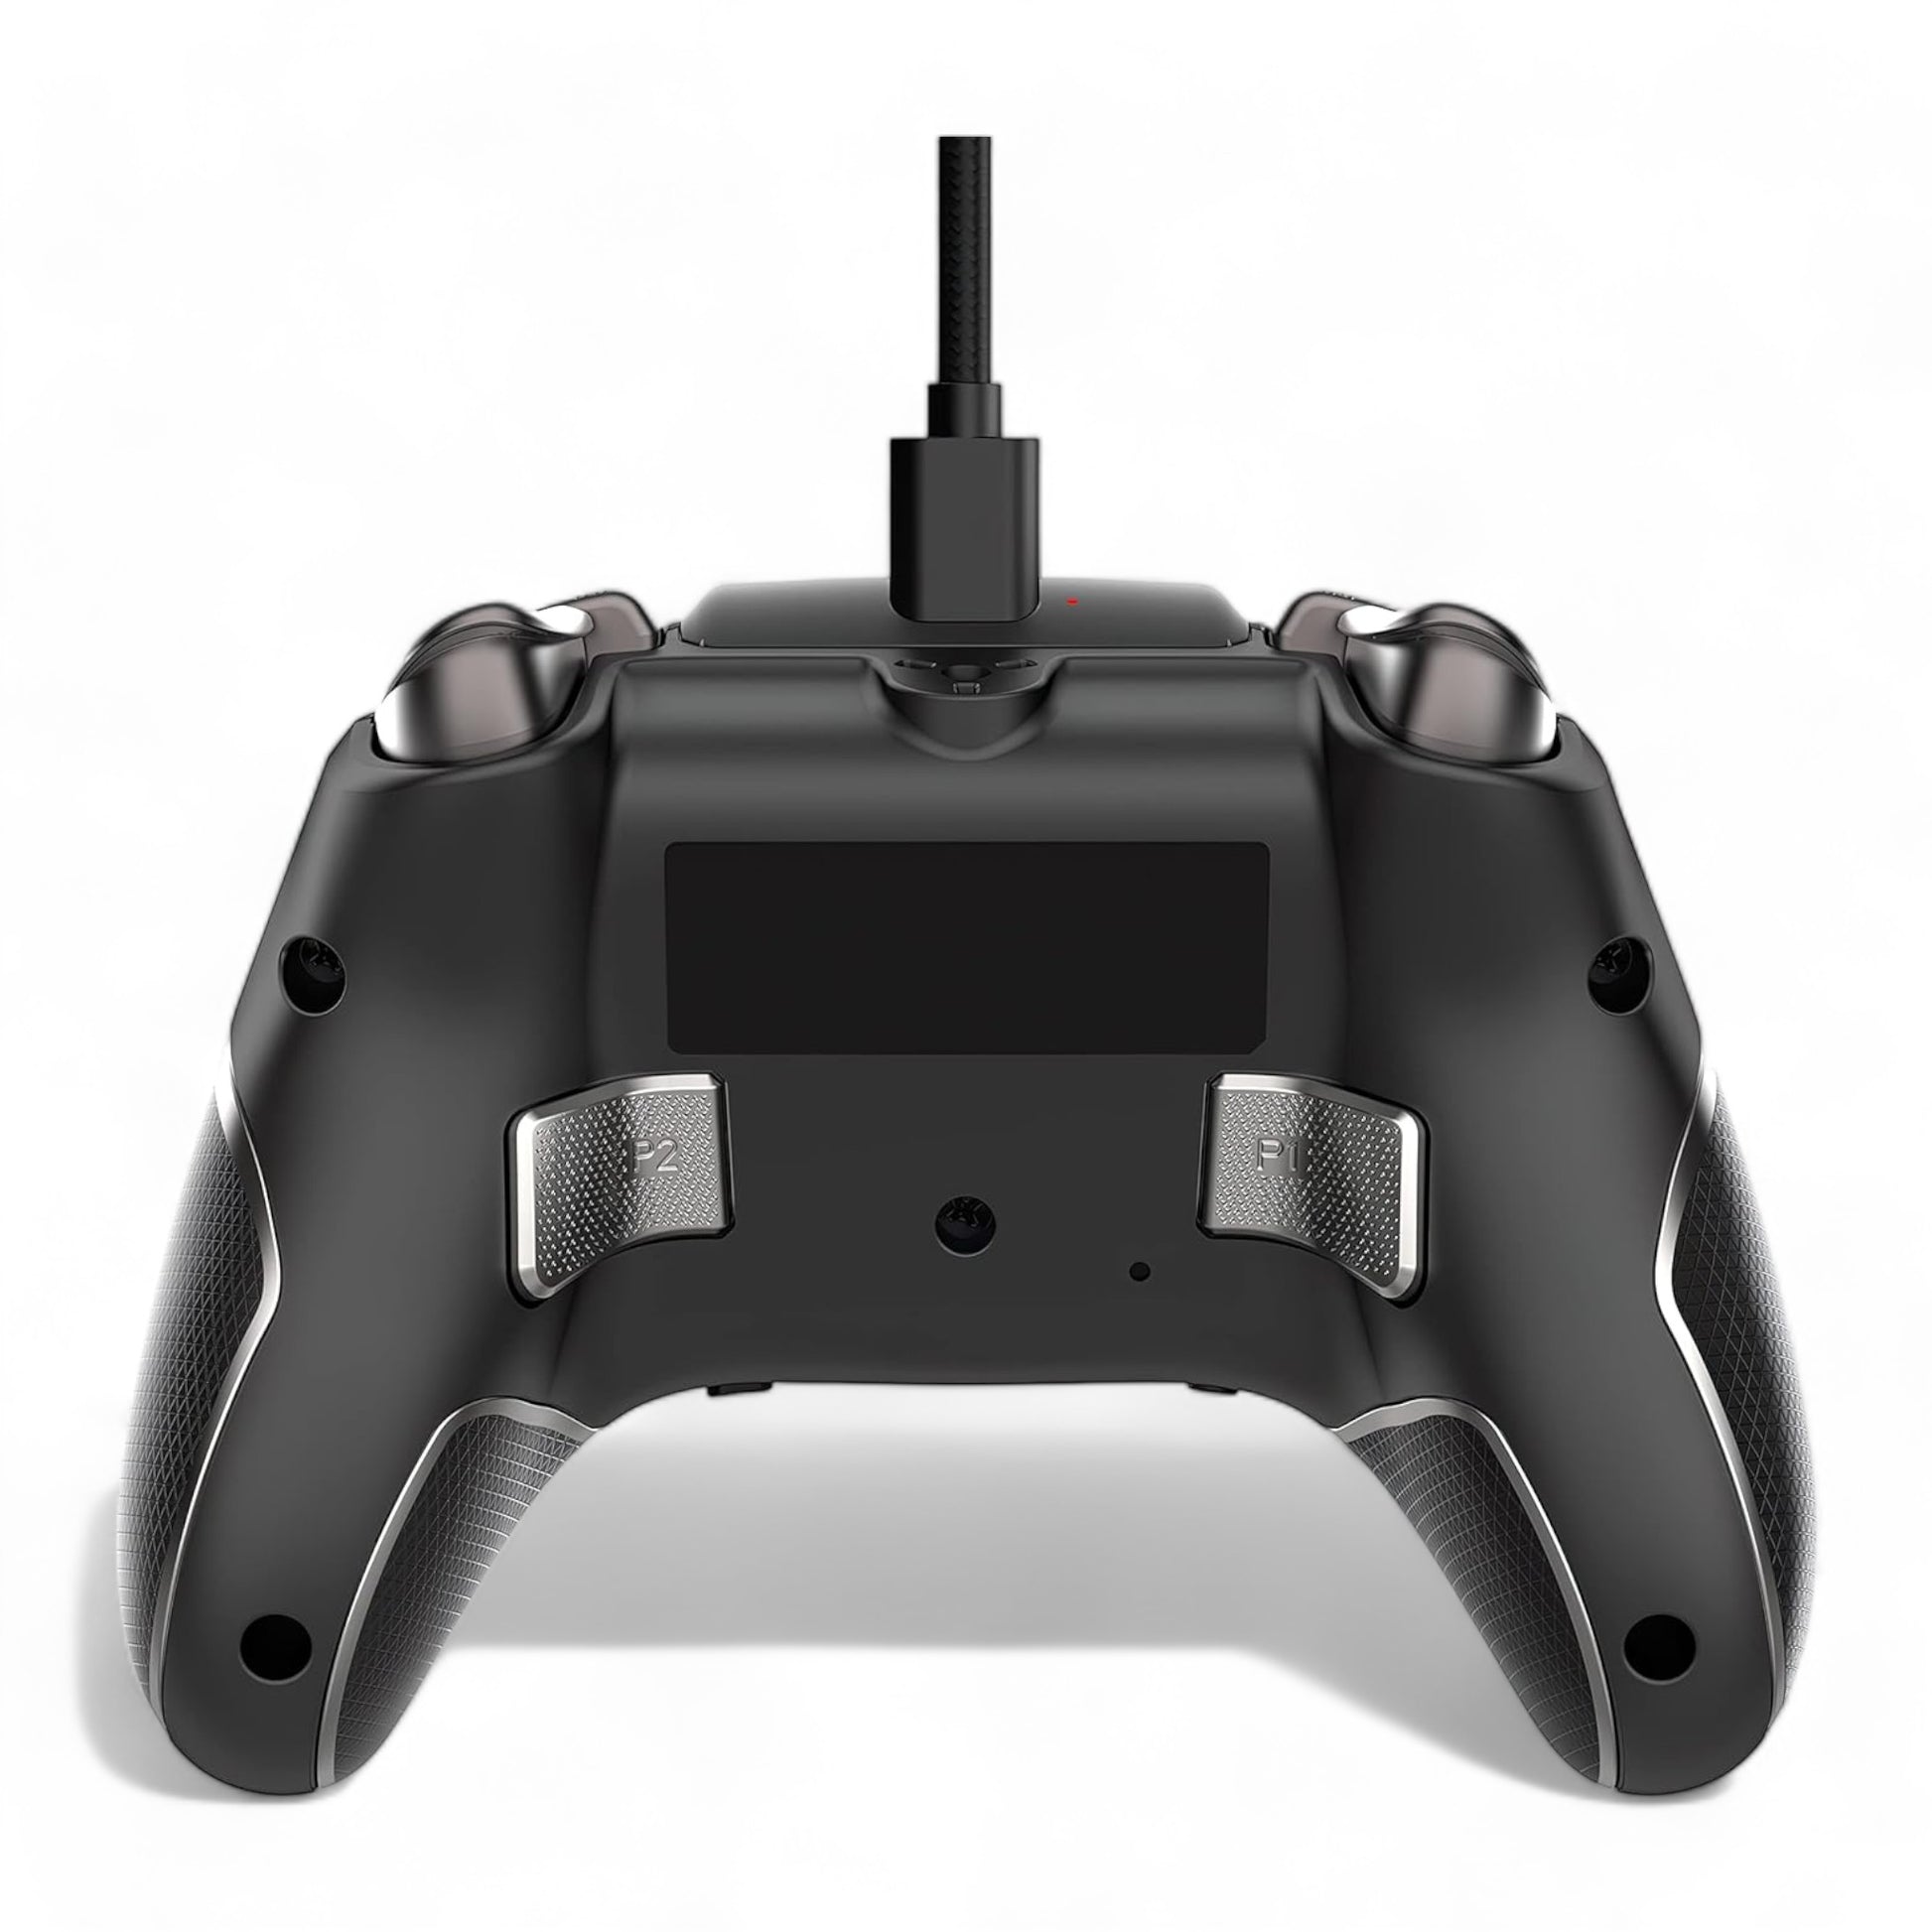 Turbo Turtle Beach Recon Cloud Hybrid Controller - Game On Everywhere with 30-Hr Battery & Superhuman Hearing - For Xbox, PC, & Android - Ricky's Garage